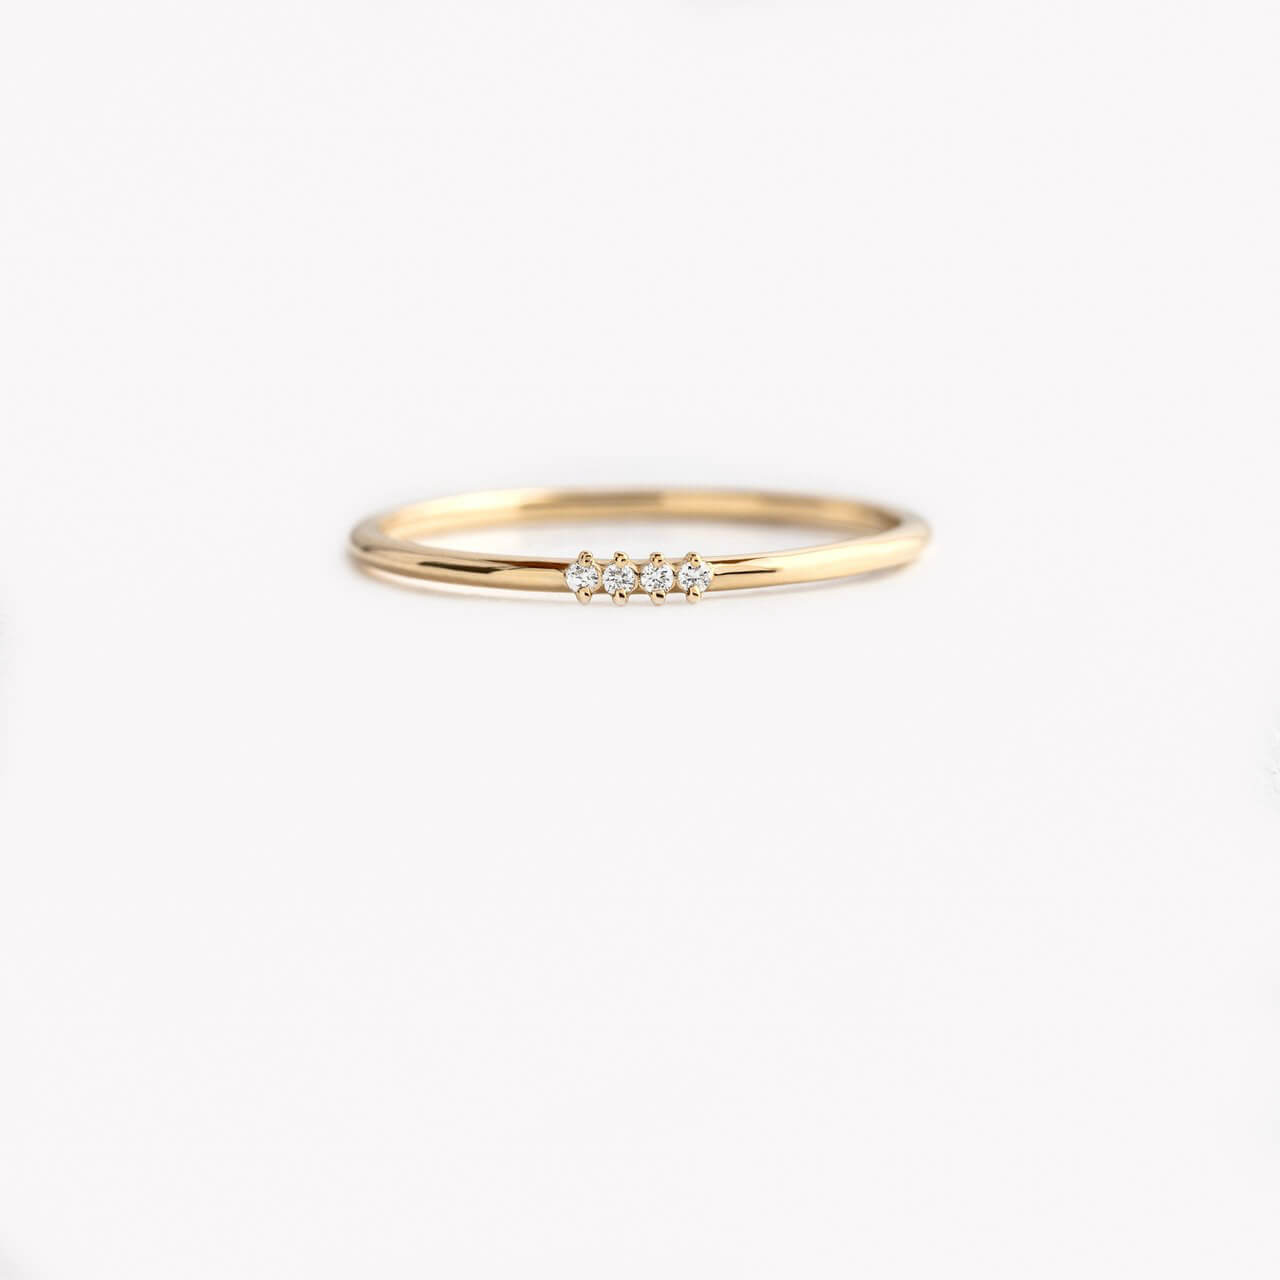 Morse Code Ring, Yellow Gold - Letter "H"